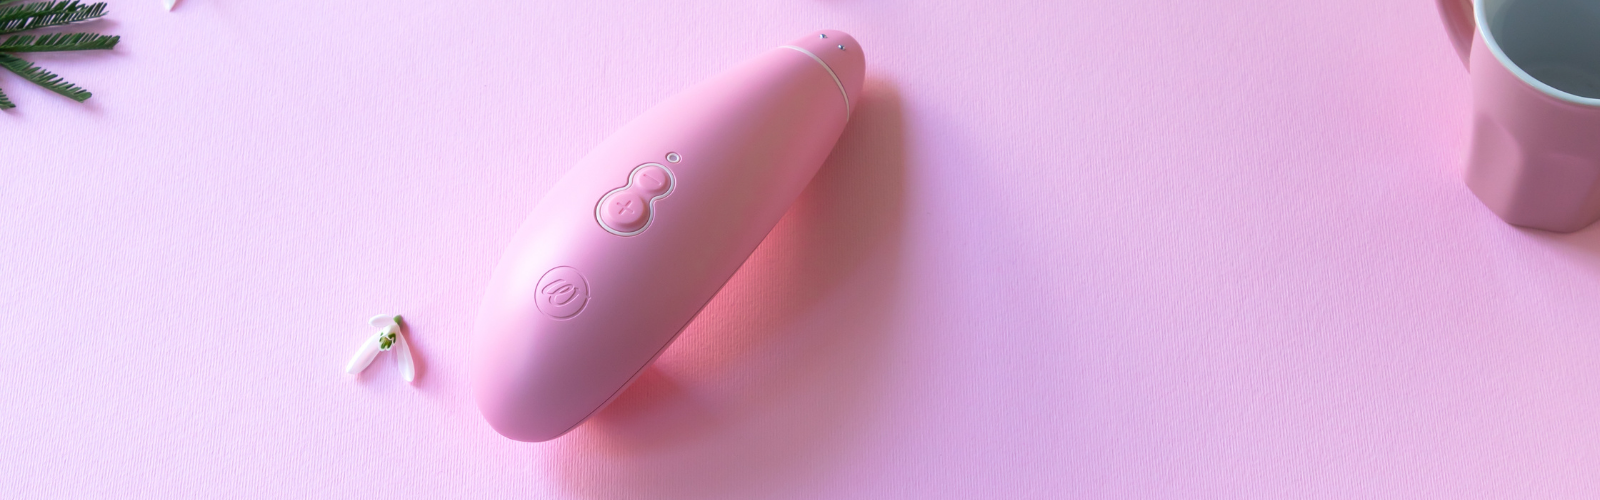 Guarantee pleasure for her and the environment with the Womanizer Eco Premium.